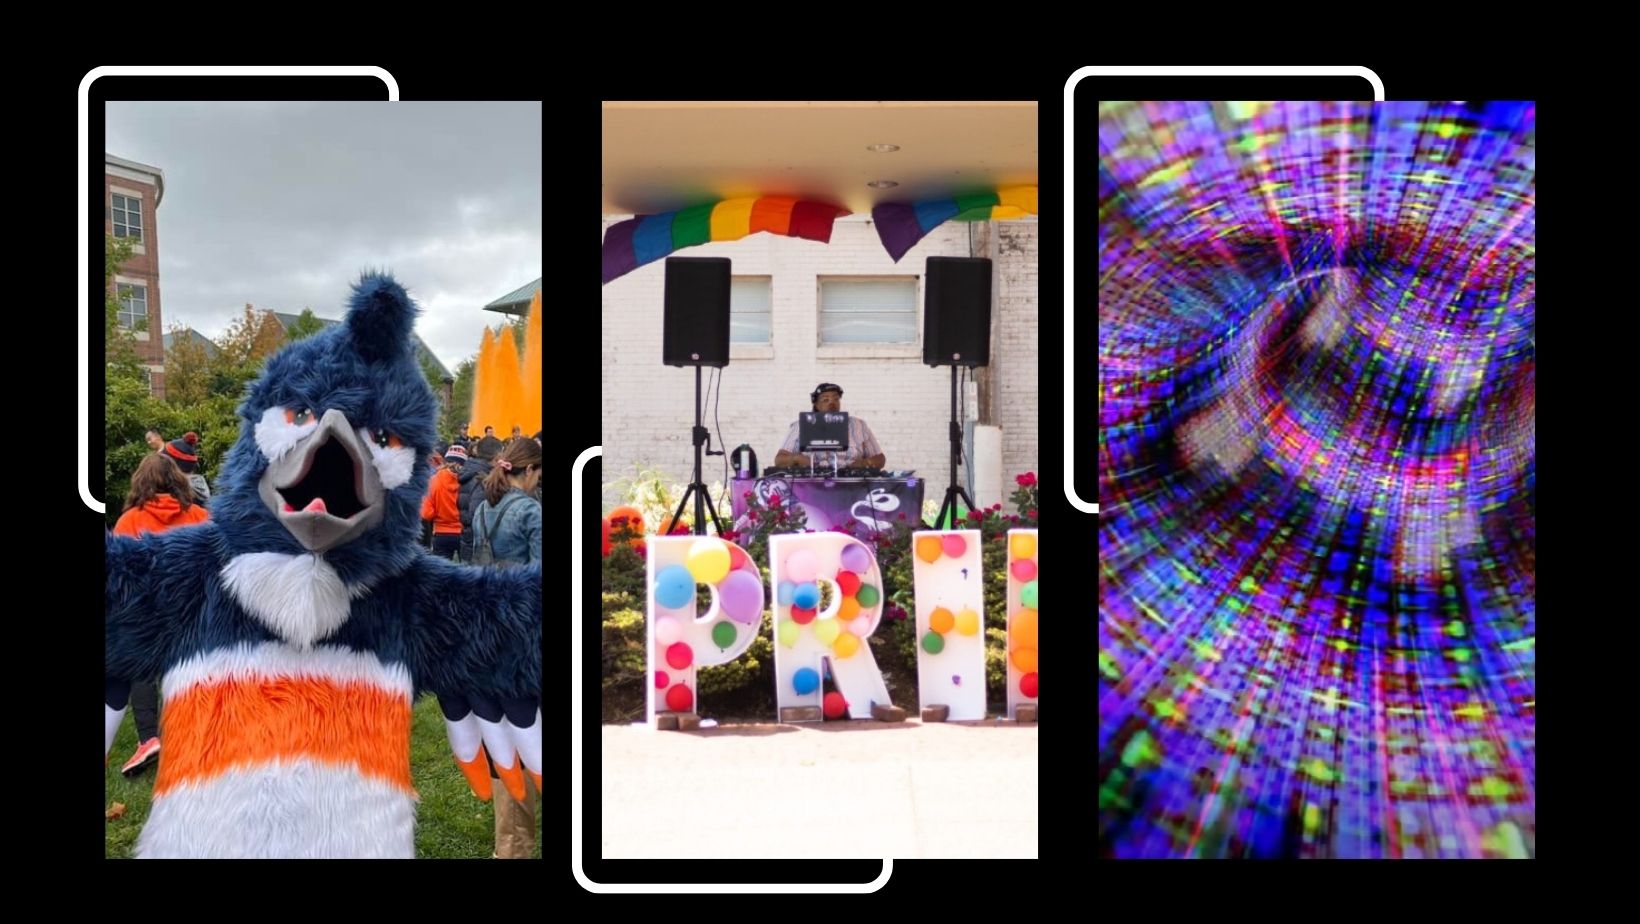 A collage of three photos, left to right: Kingfisher, a DJ at a pride event, and a quantum network image